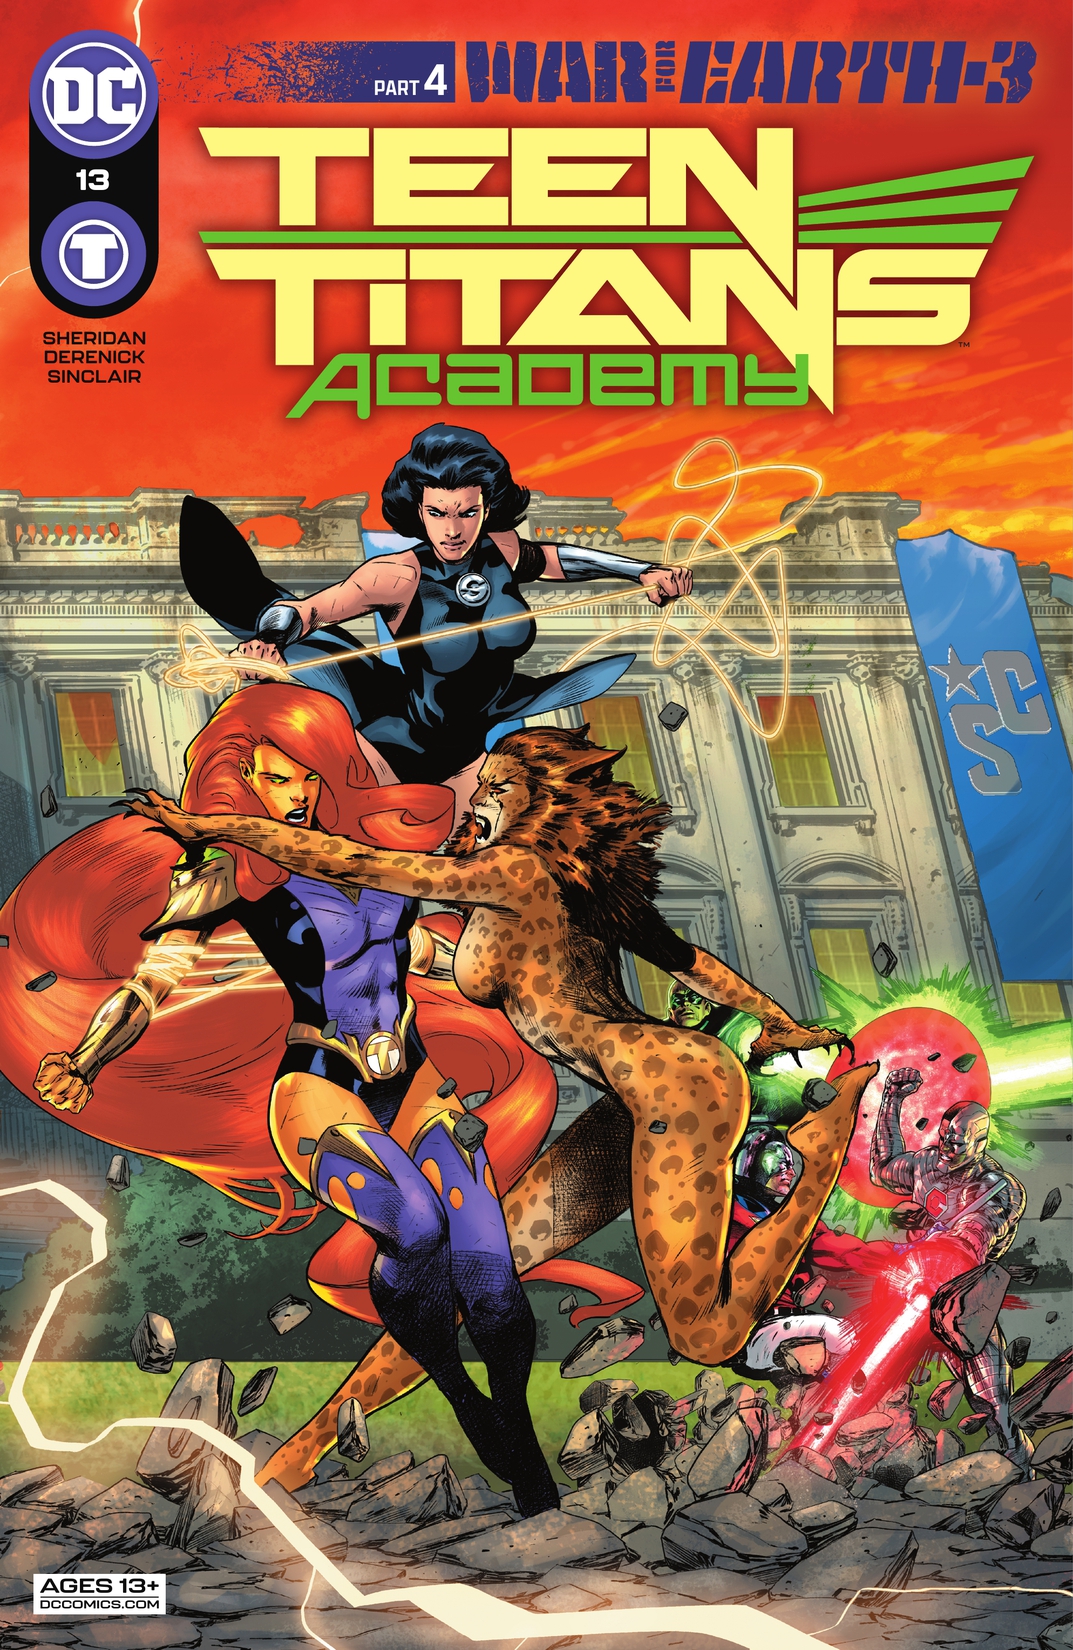 Teen Titans Academy #13 preview images